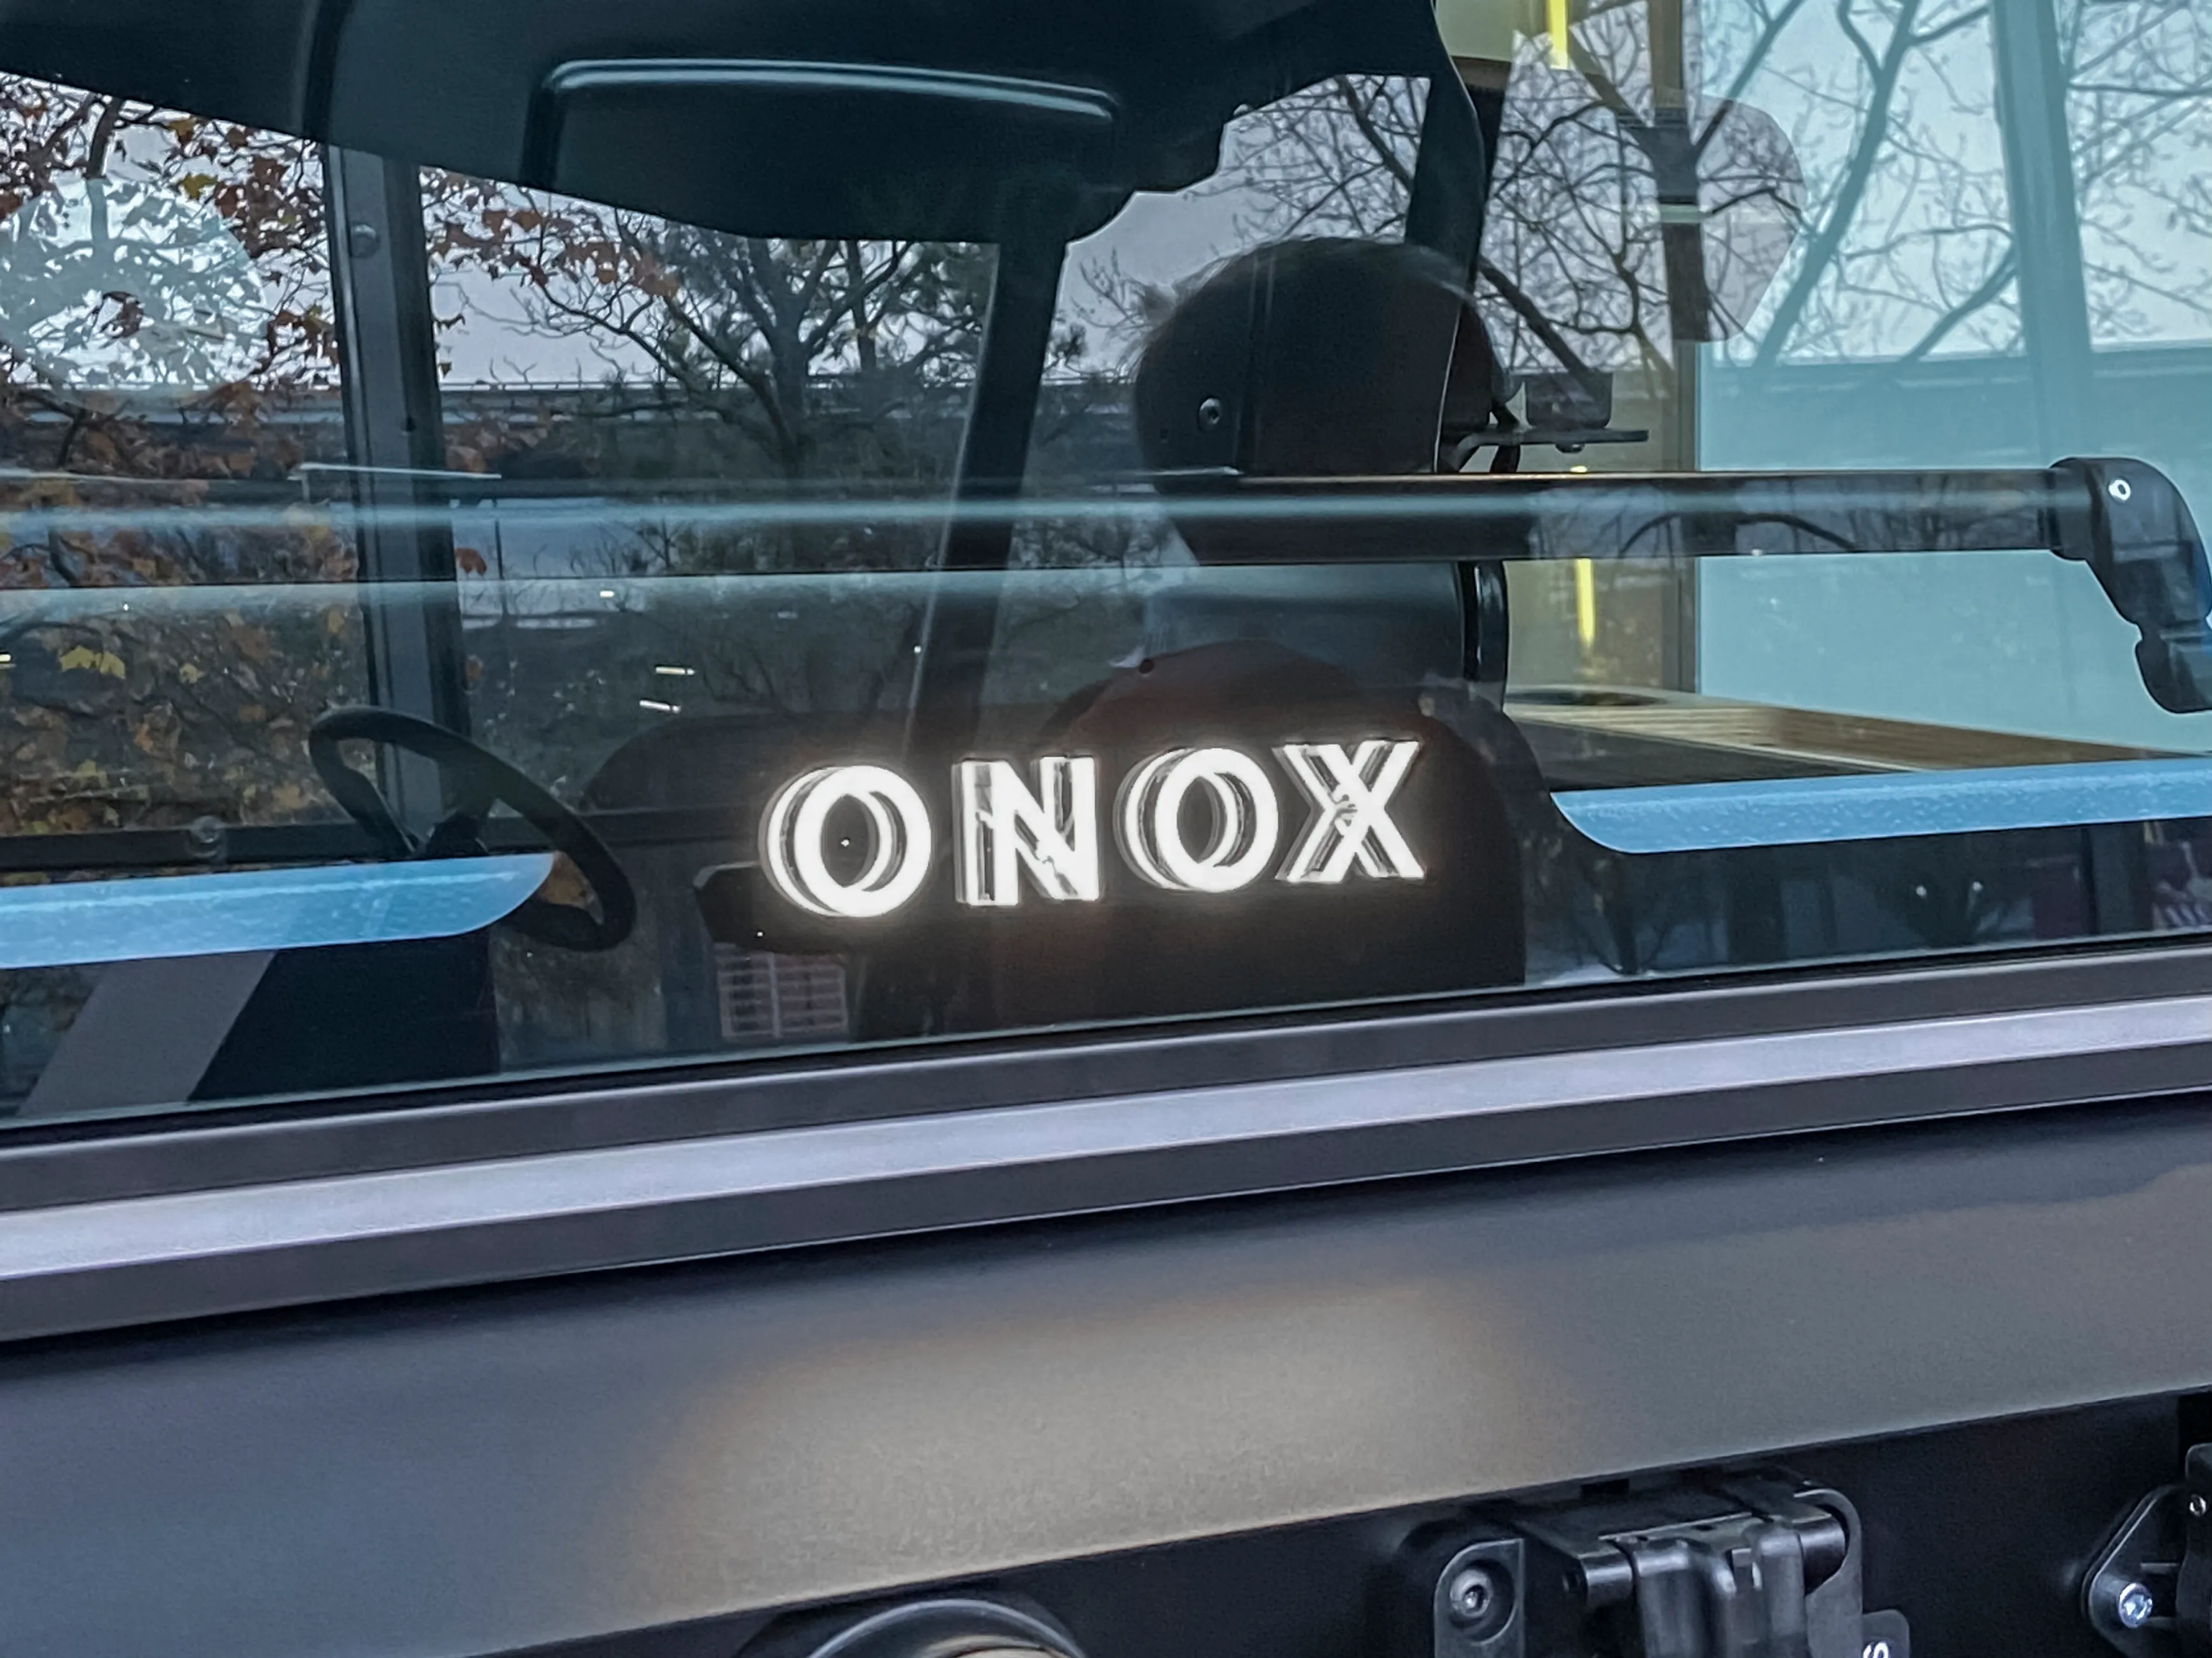 A detail of the Onox tractor from the rear windshield showing the glowing logo type